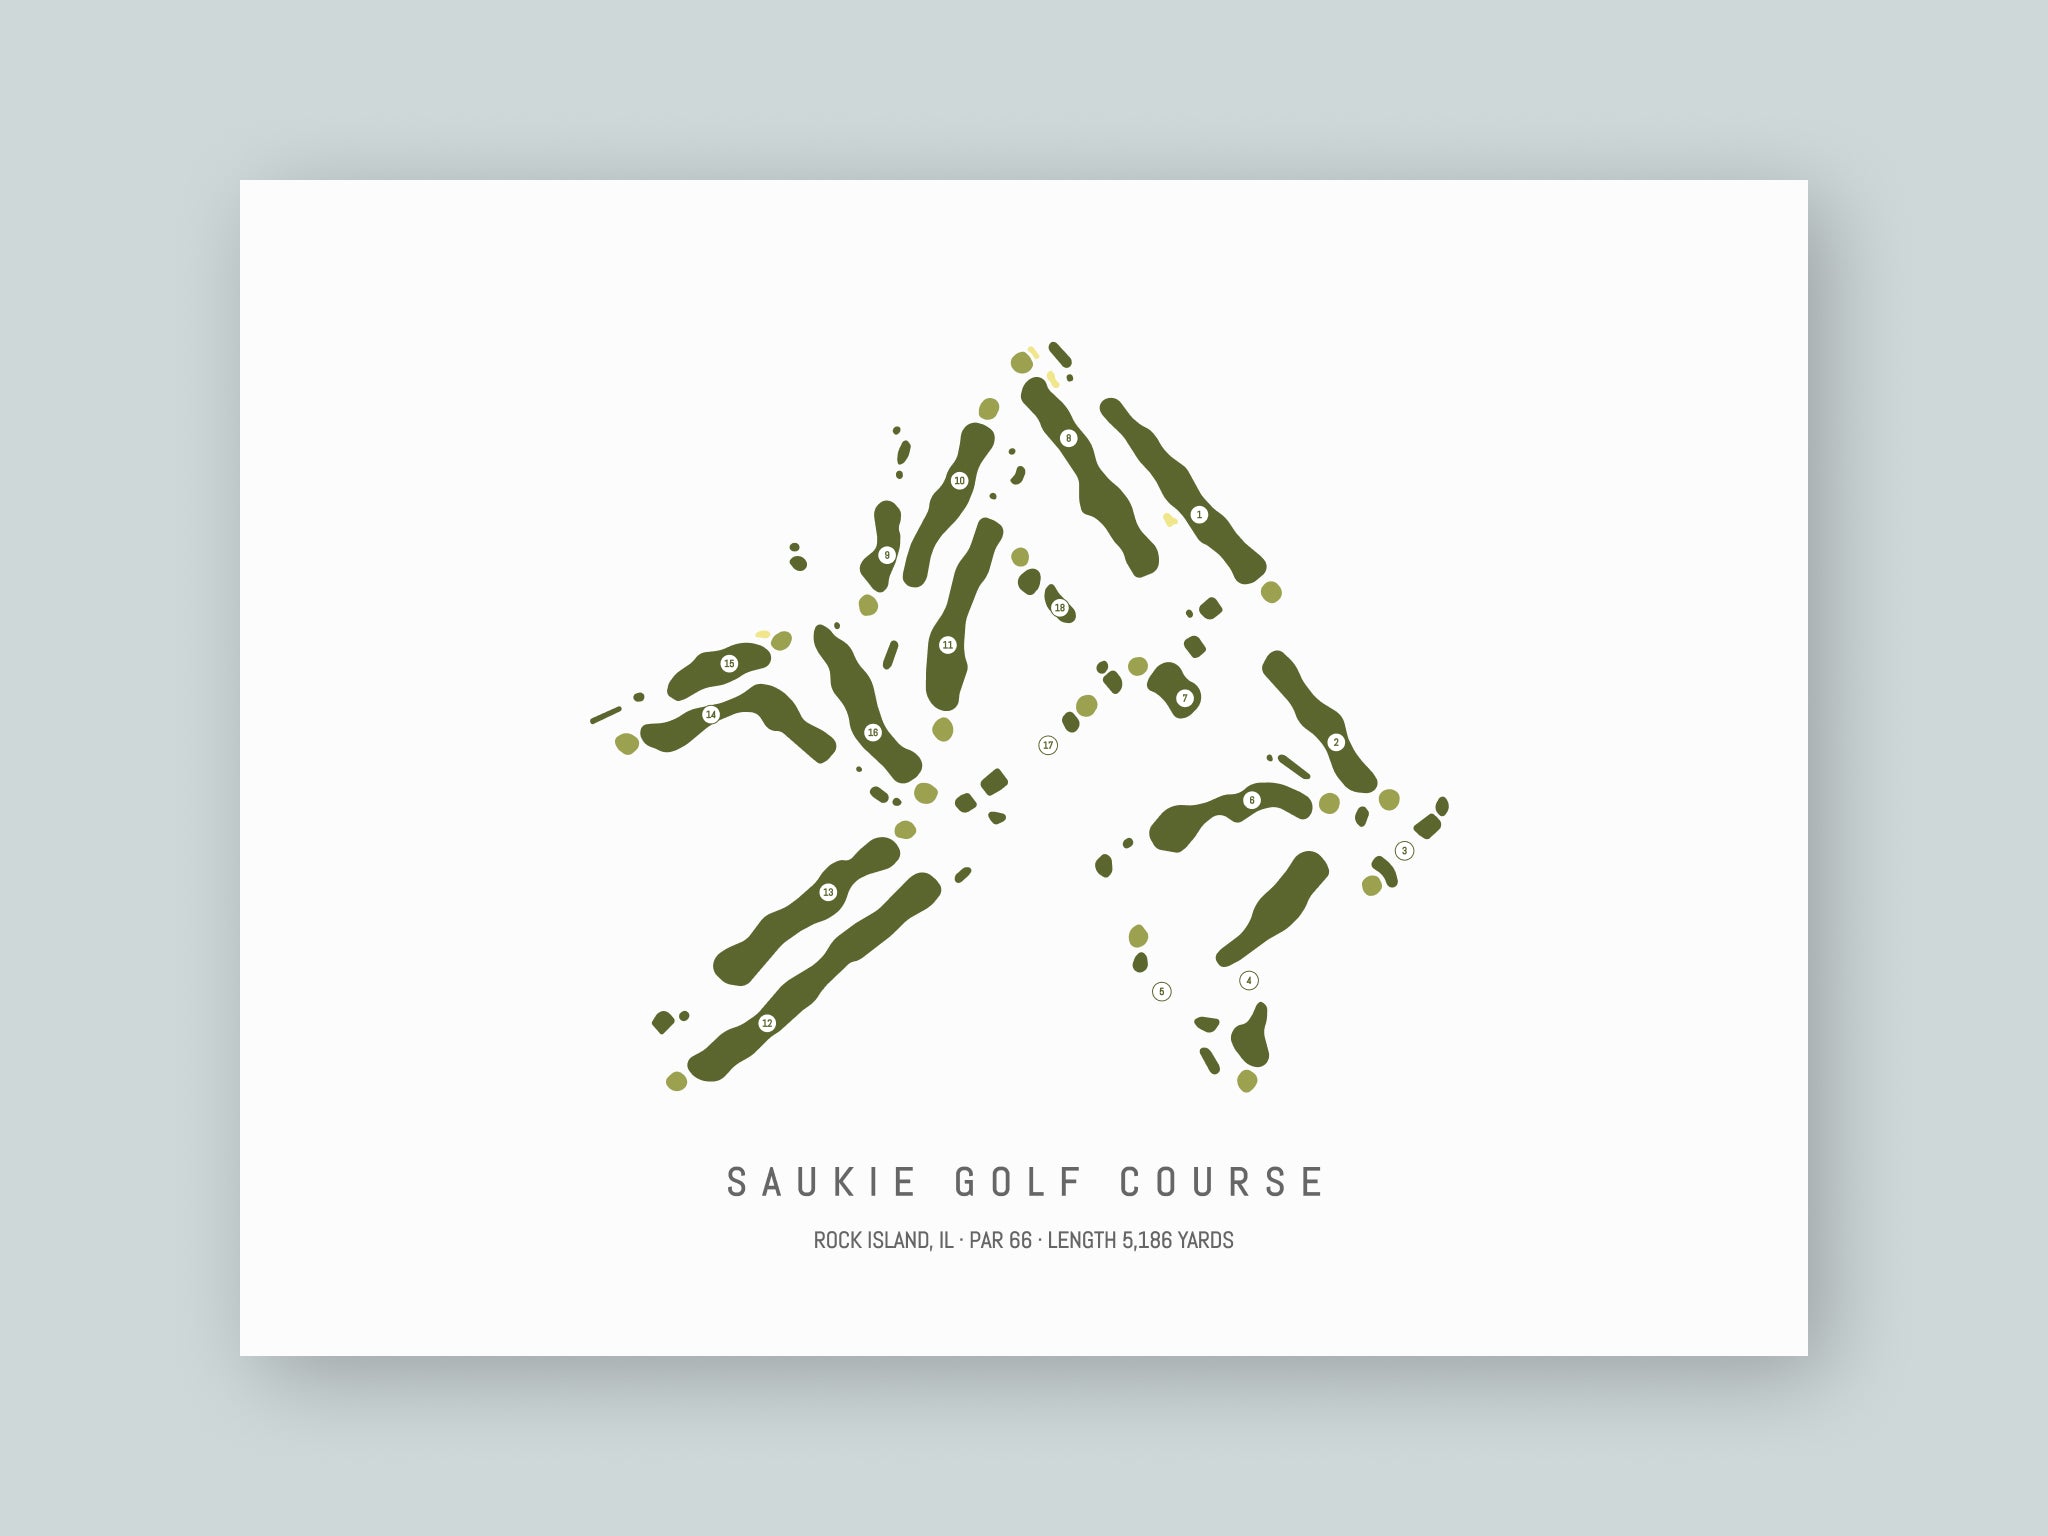 Saukie-Golf-Course-IL--Unframed-24x18-With-Hole-Numbers